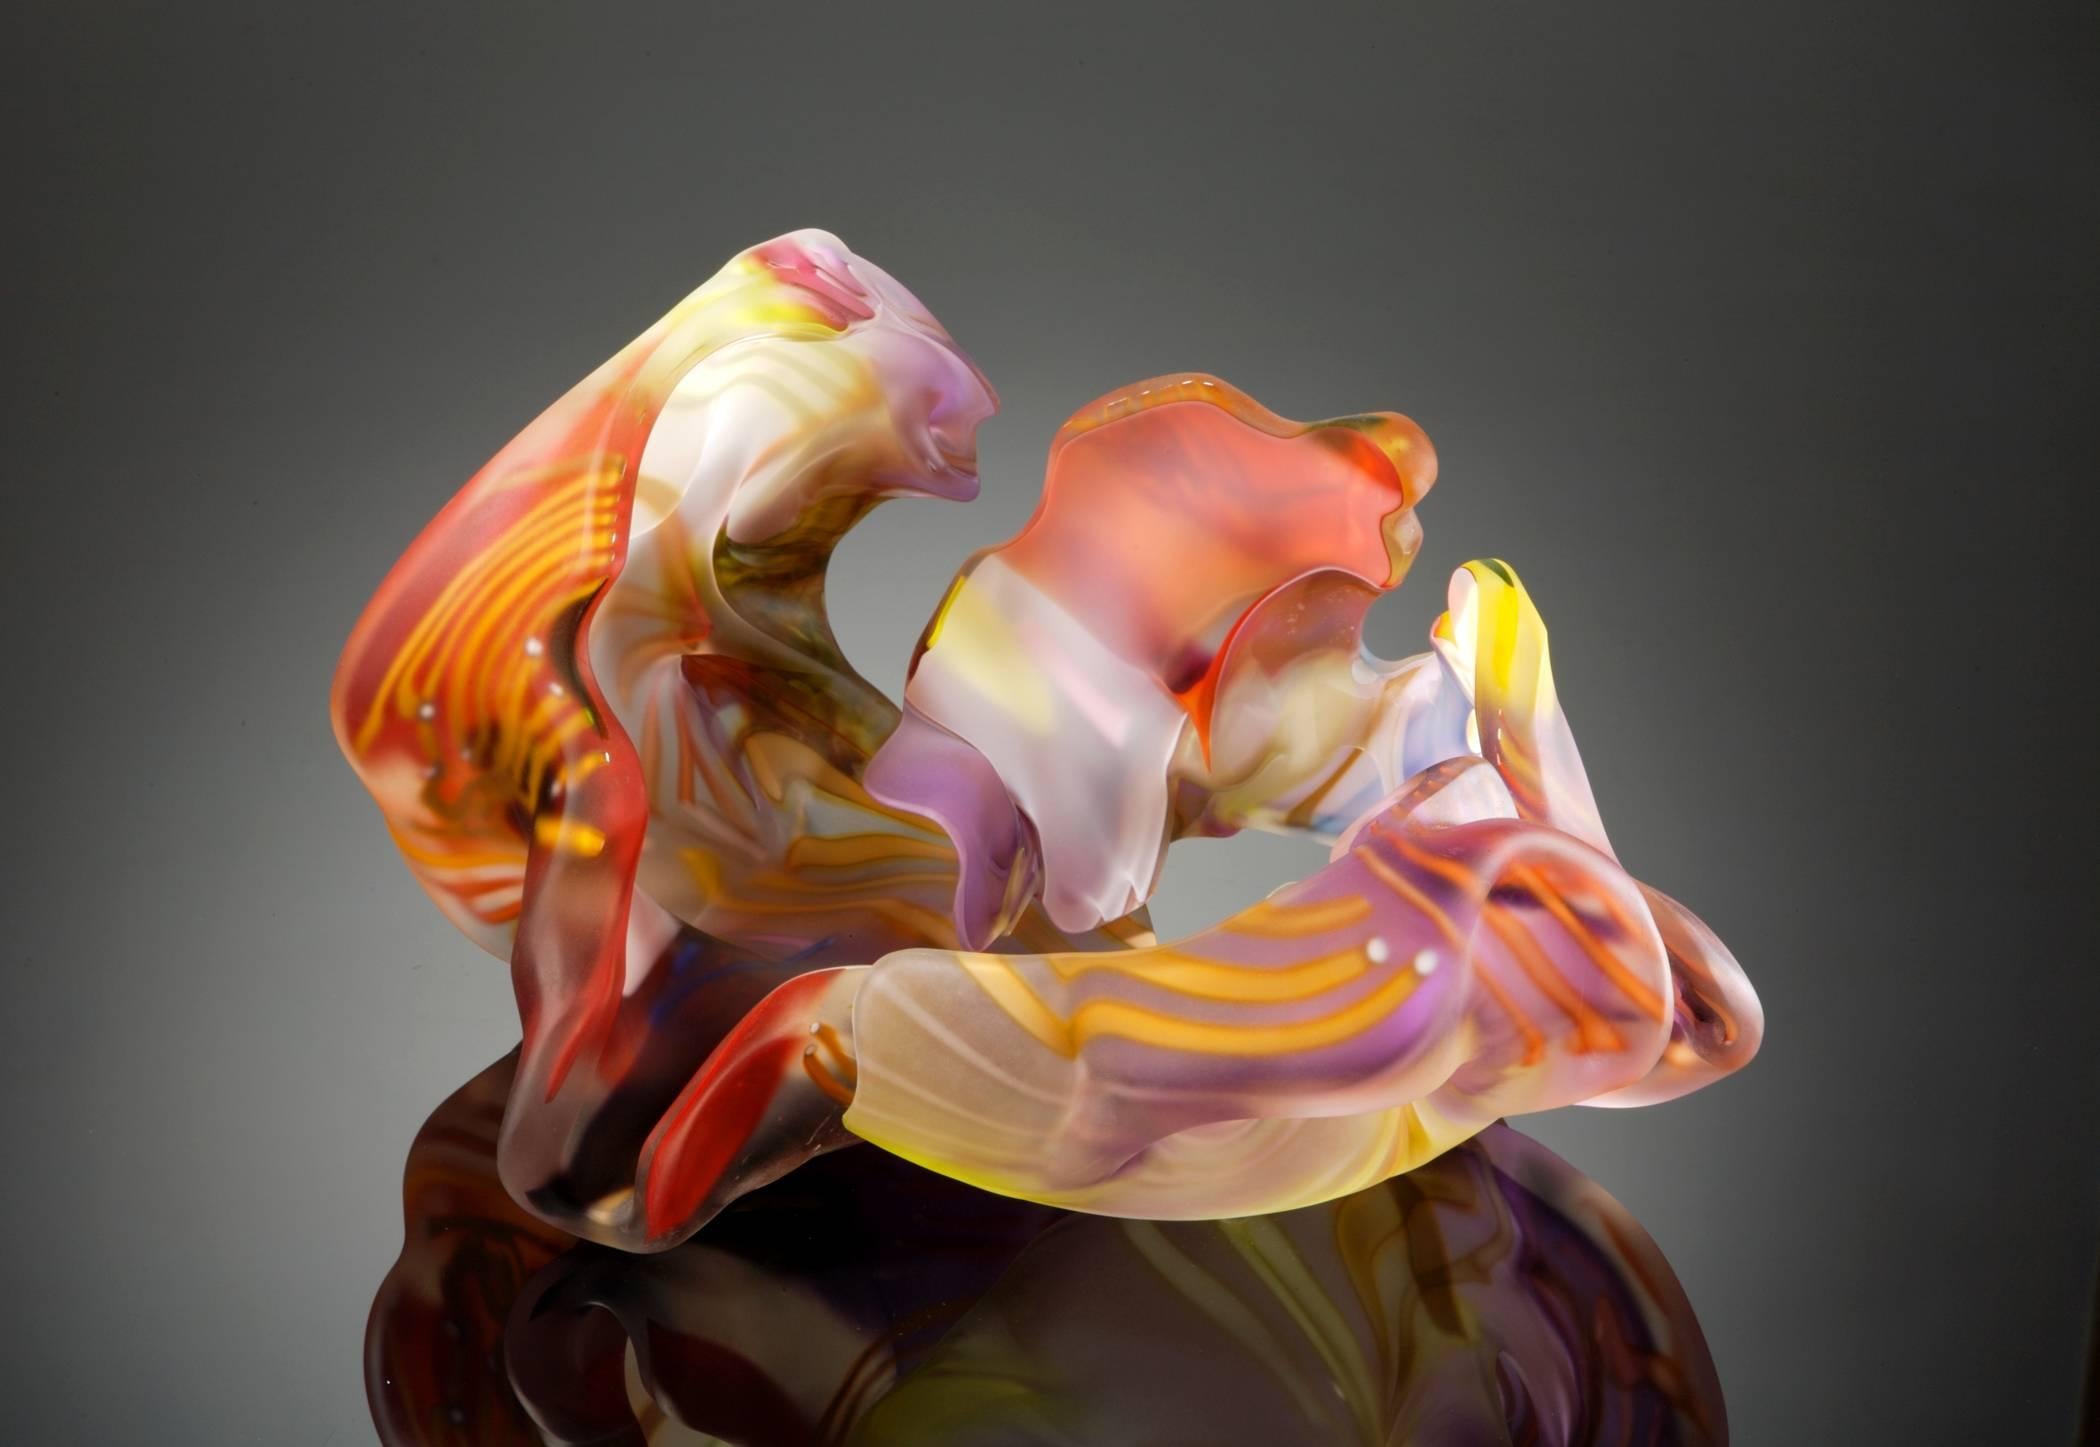 "San Jose Group 2004-06 #1", Blown, Cut, Sandblasted, and Acid Etched Glass - Sculpture by Marvin Lipofsky